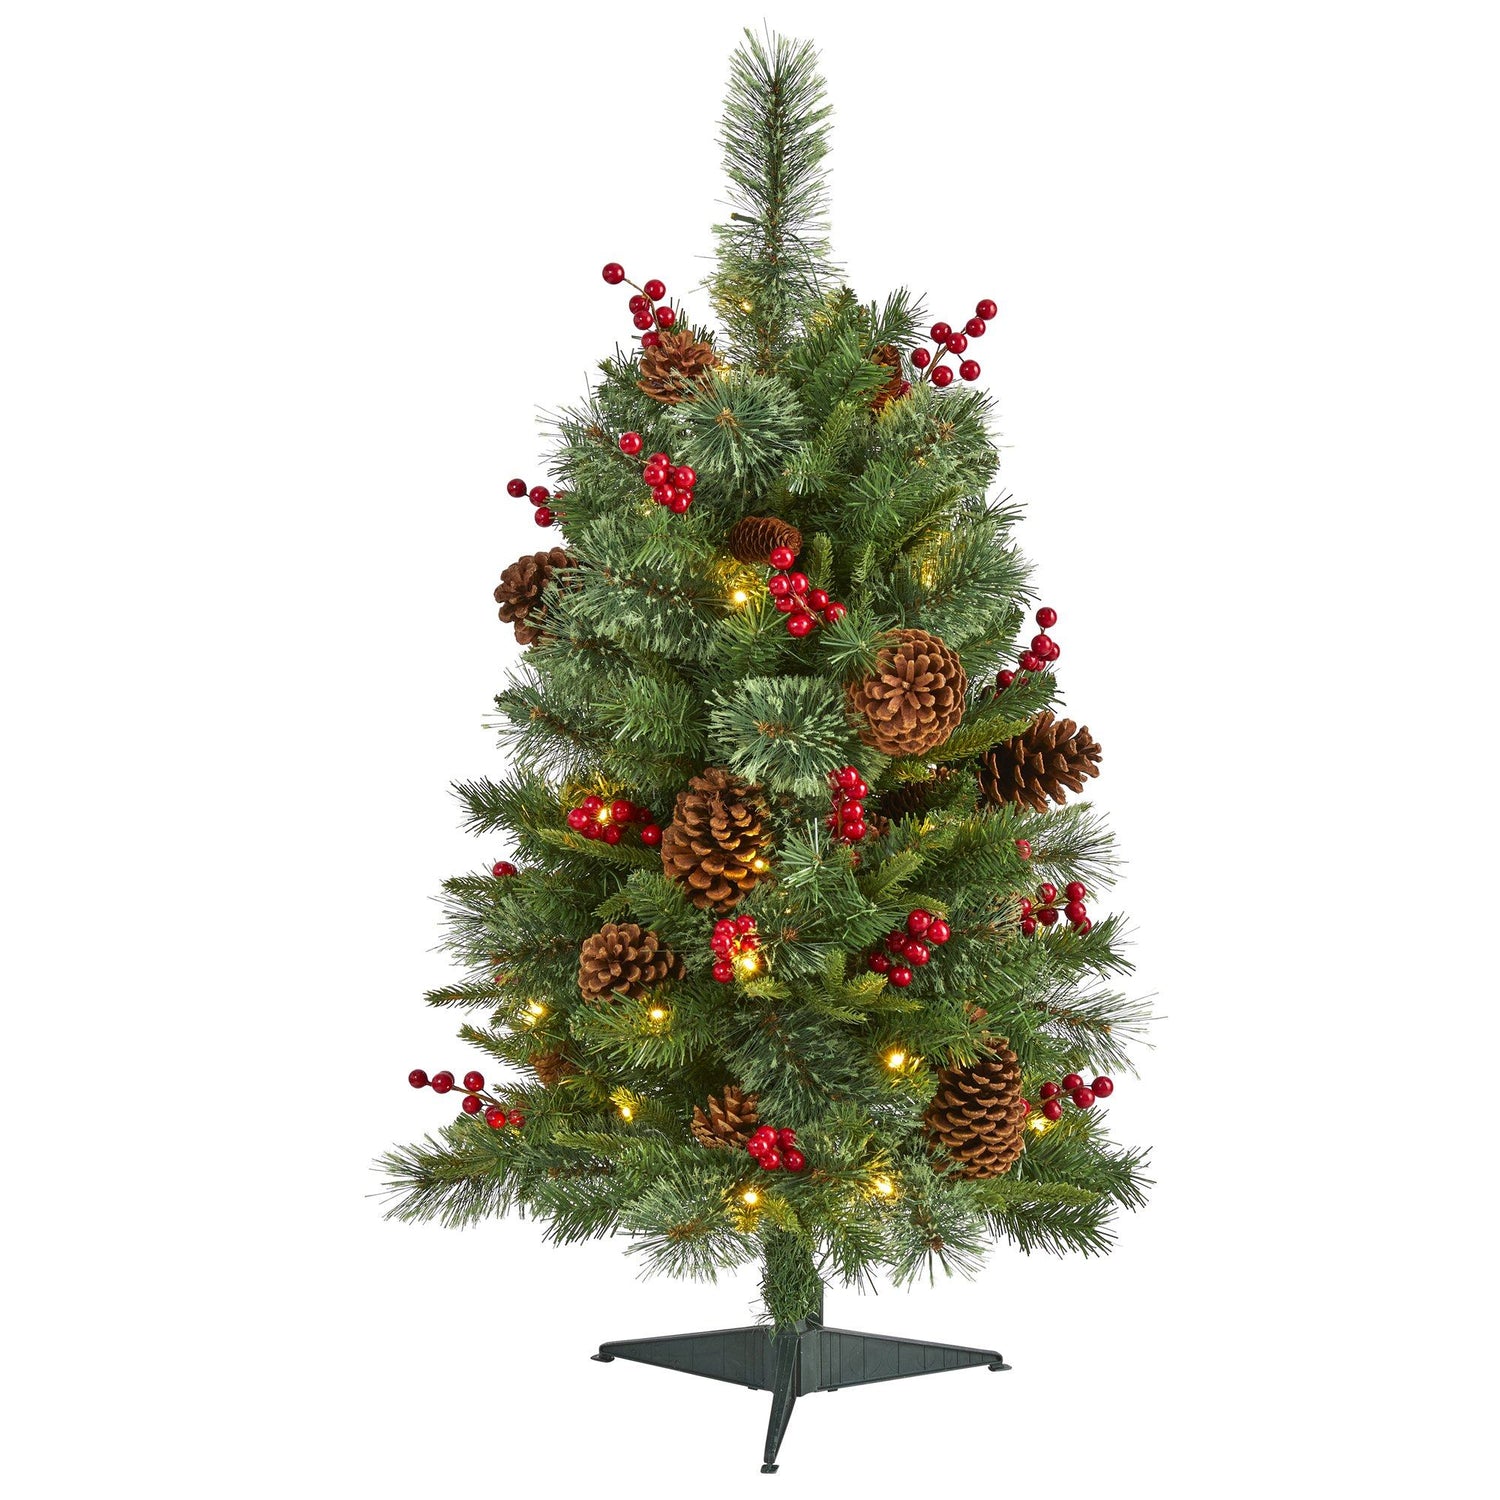 3’ Norway Mixed Pine Artificial Christmas Tree with 50 Clear LED Lights, Pine Cones and Berries